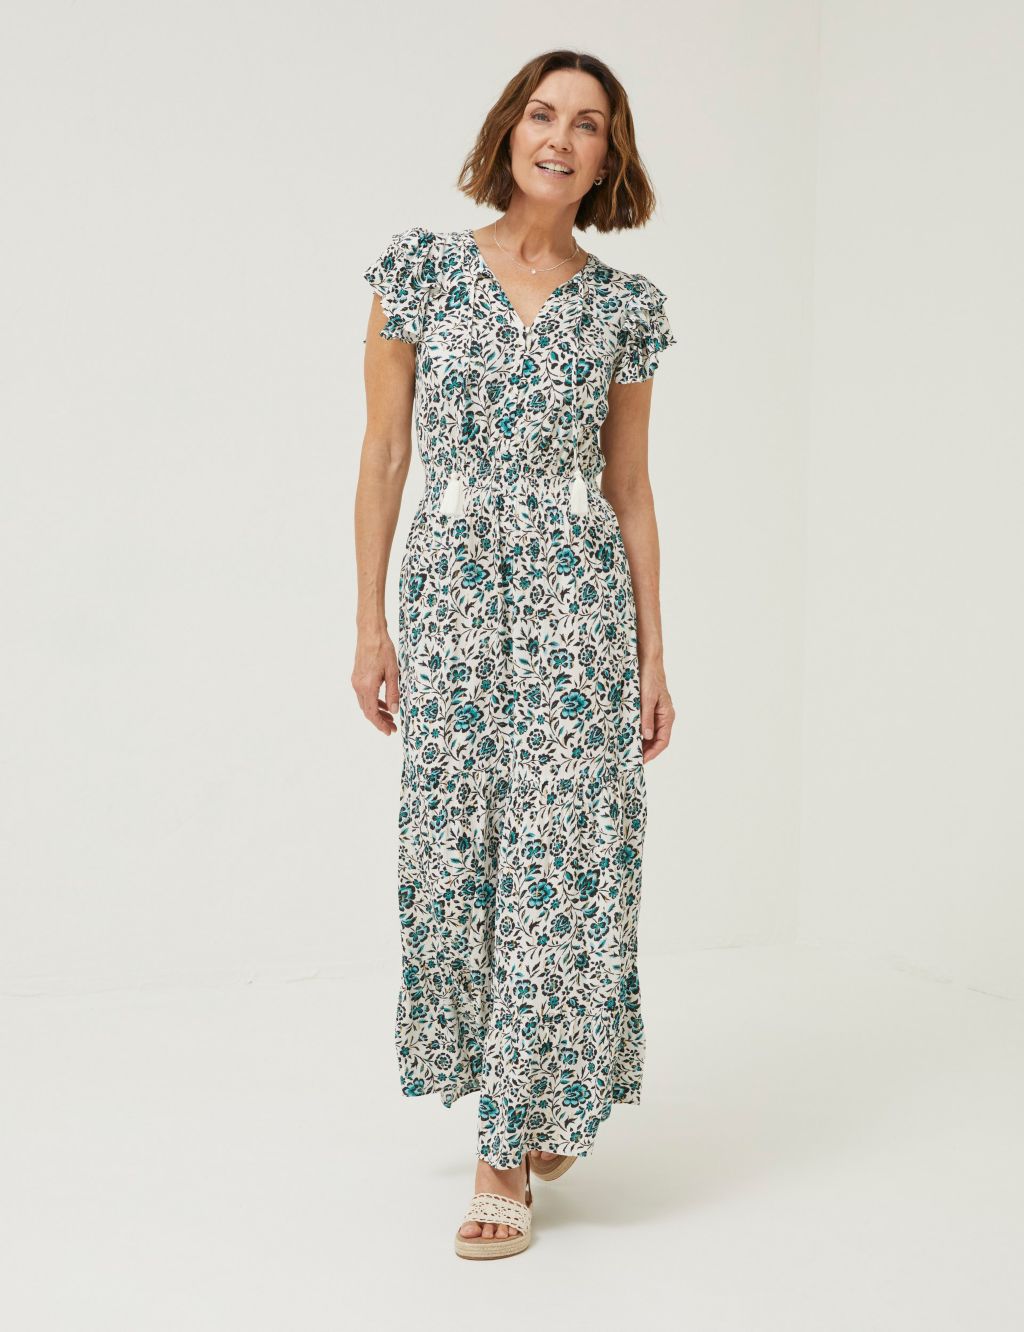 Floral Tie Neck Shirred Maxi Tiered Dress image 1